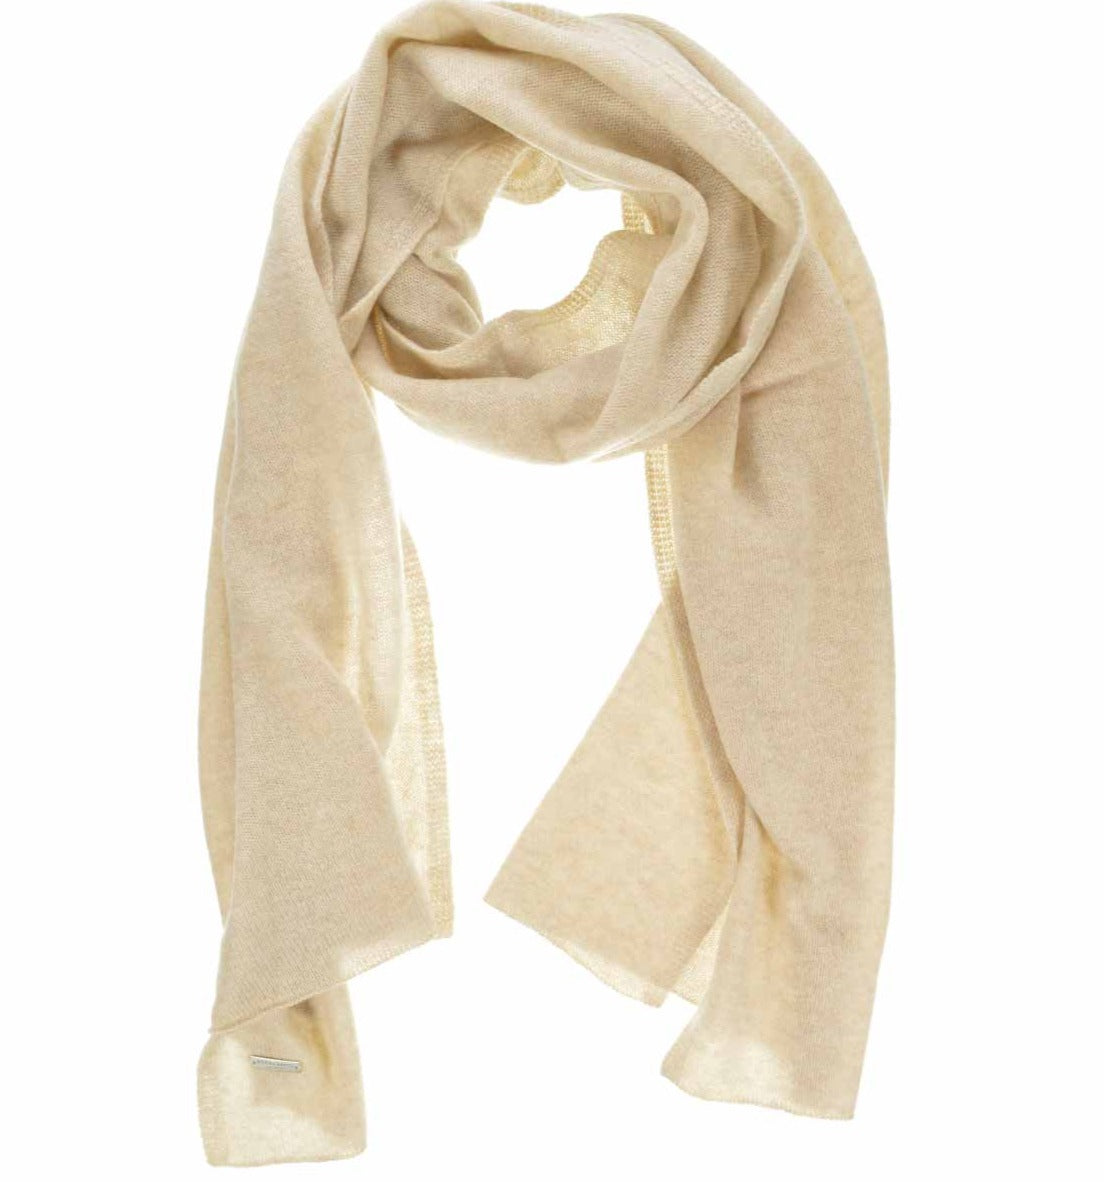 Seeberger Cashmere Scarf in Sand